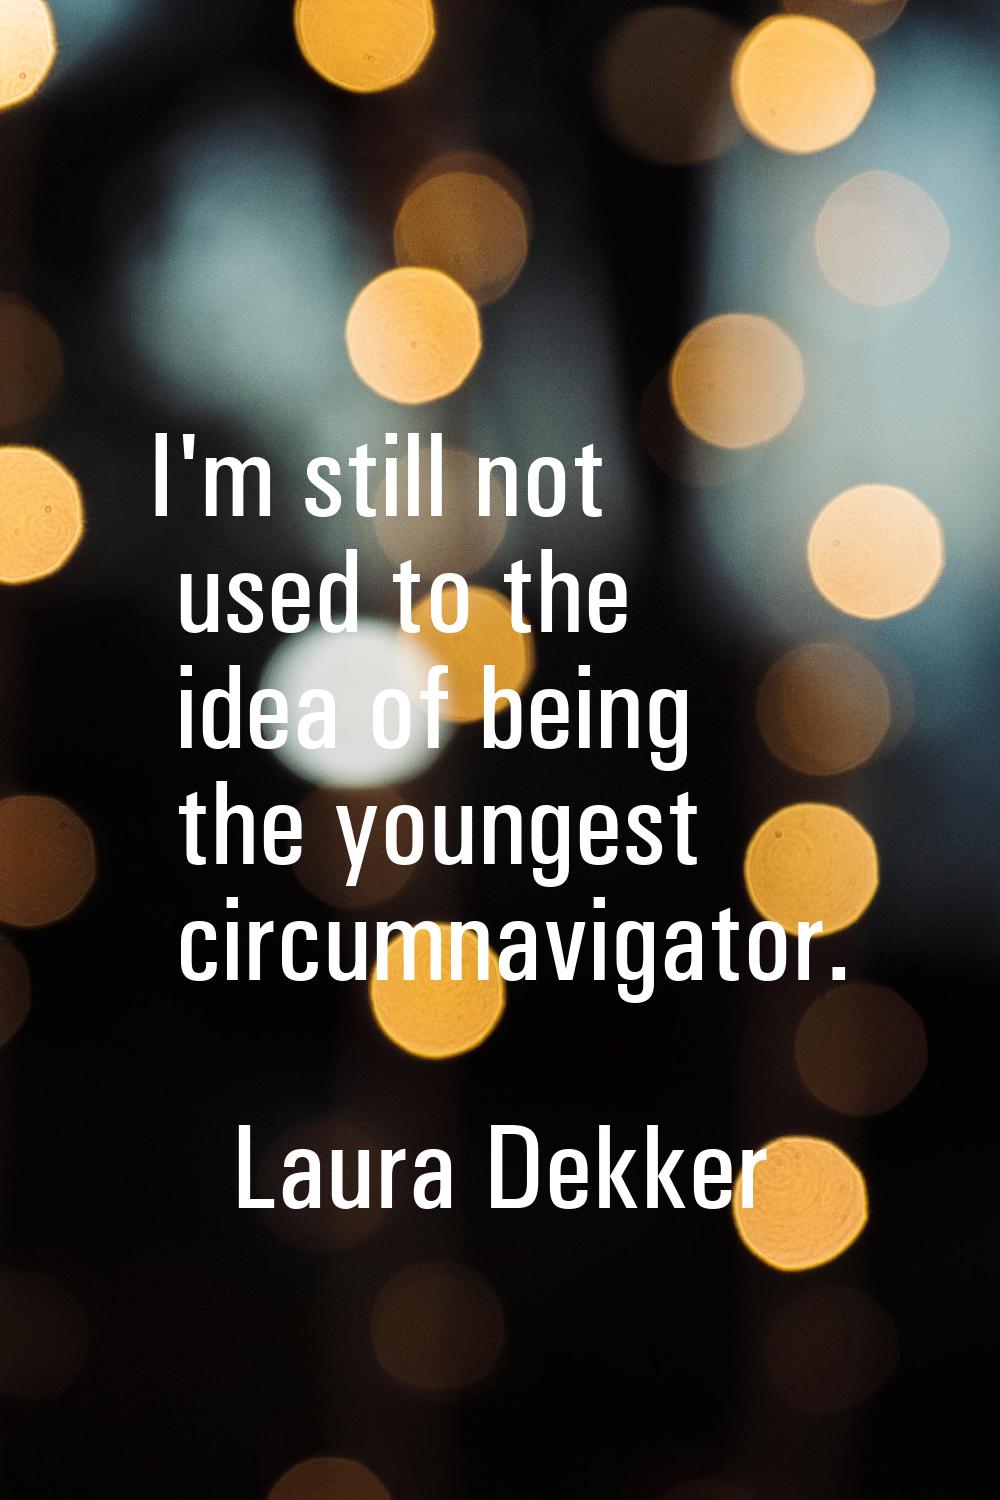 I'm still not used to the idea of being the youngest circumnavigator.